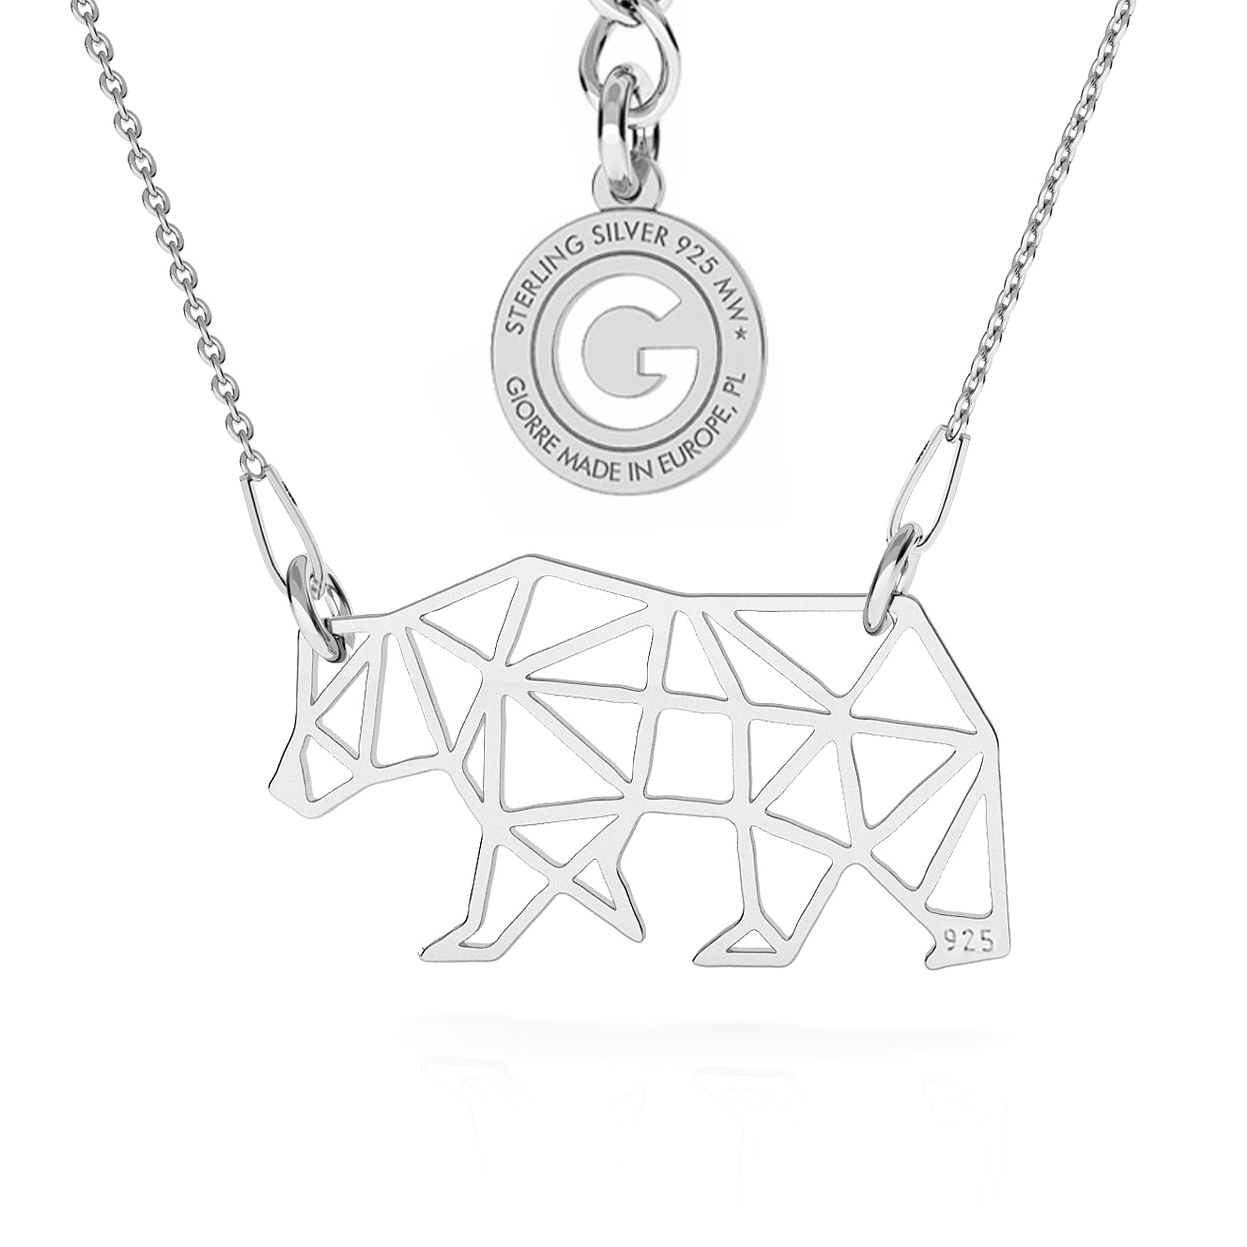 CAT ORIGAMI NECKLACE SILVER 925